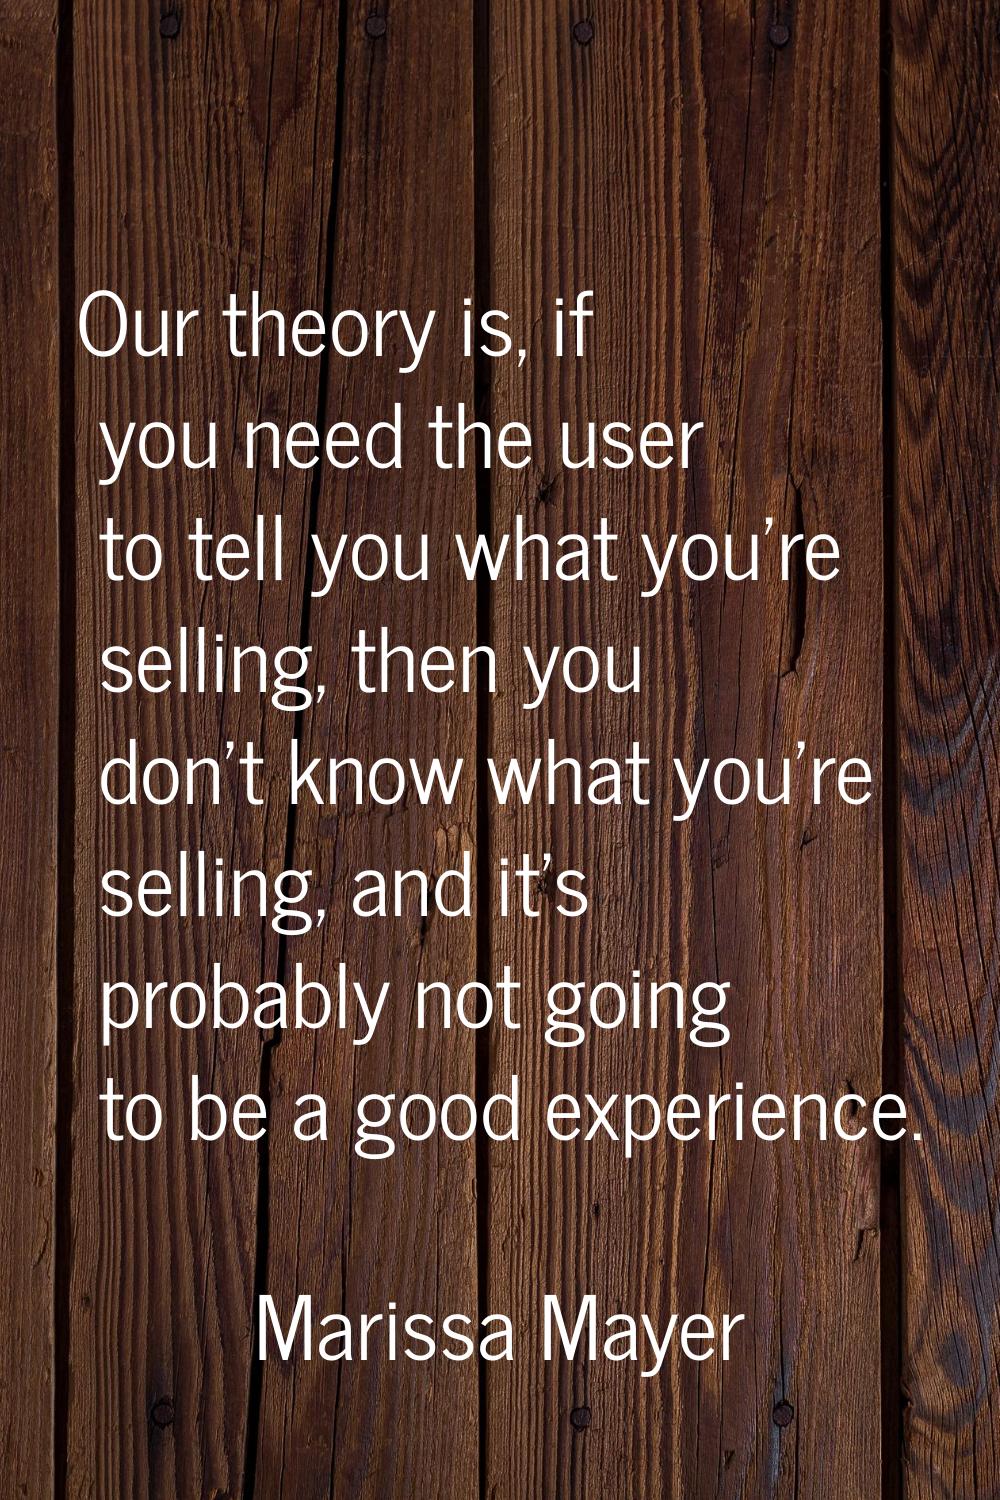 Our theory is, if you need the user to tell you what you're selling, then you don't know what you'r